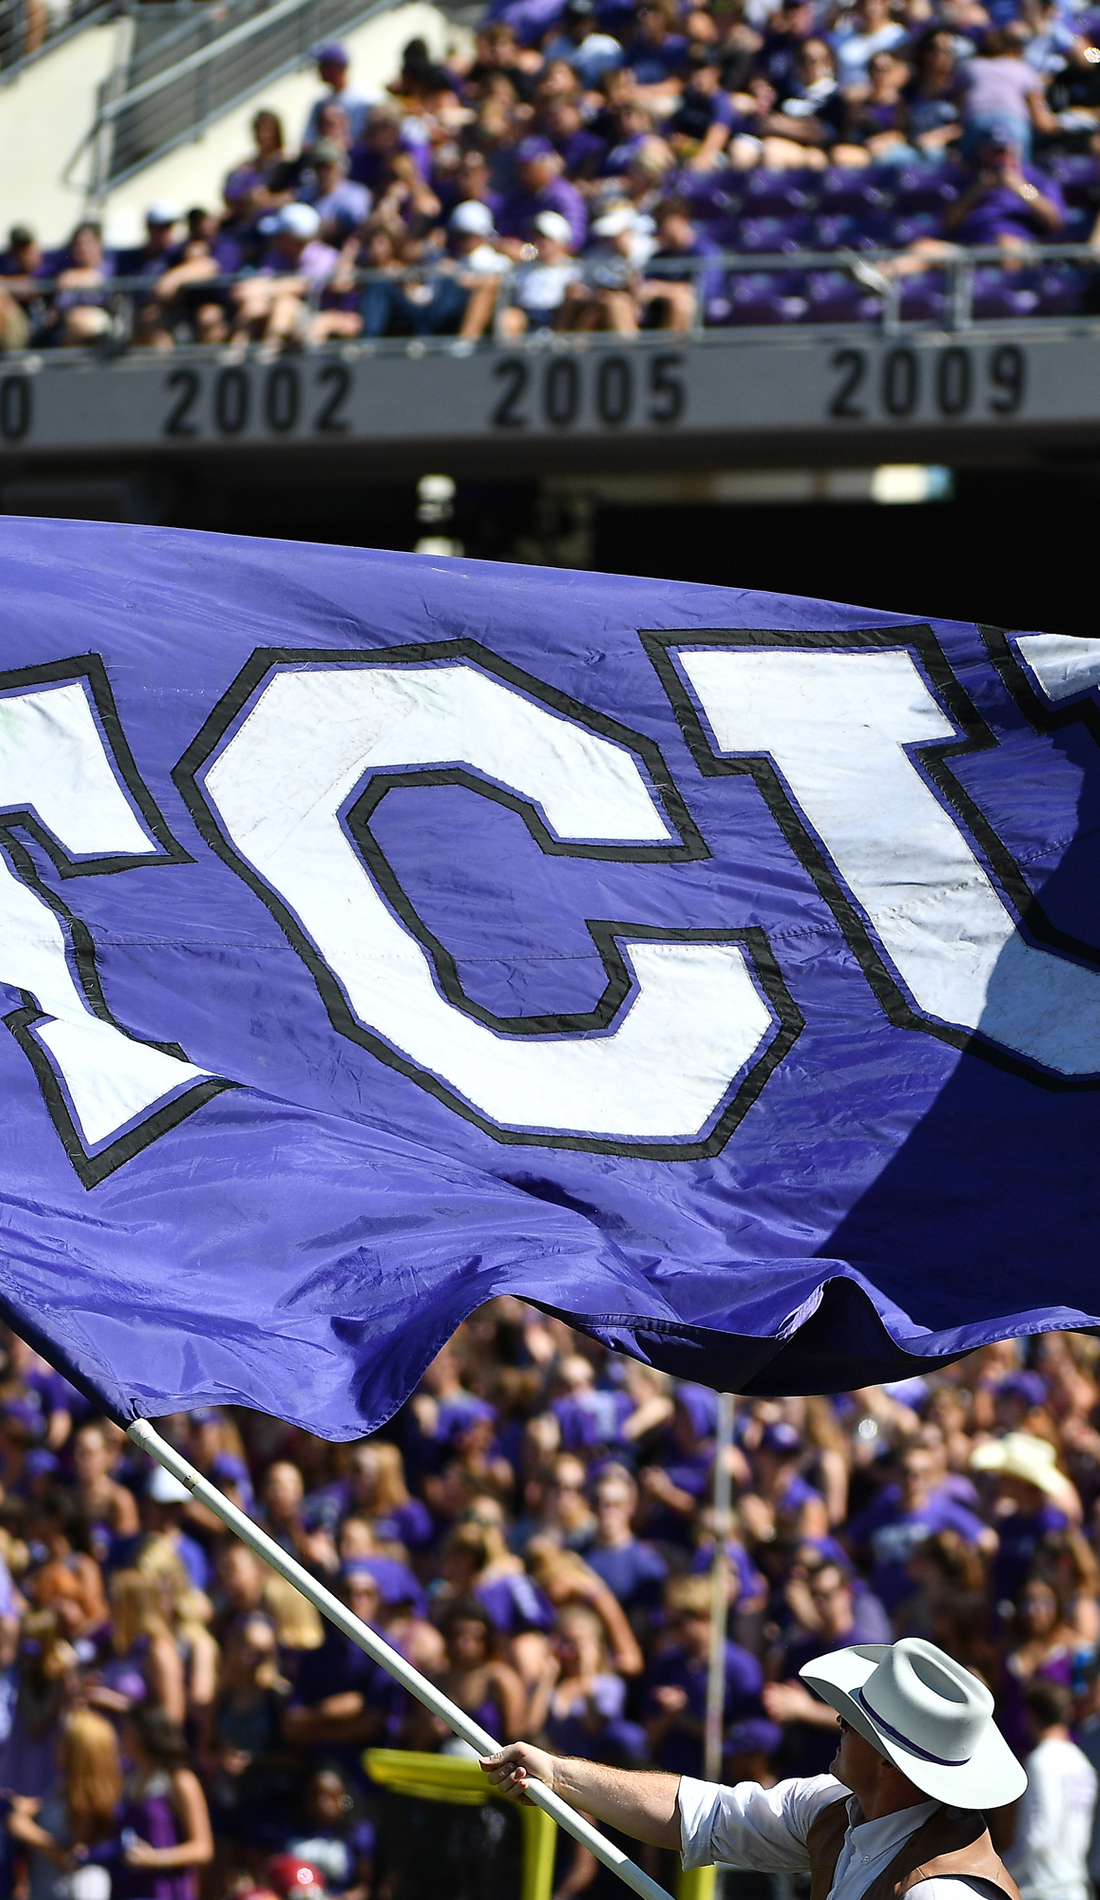 A TCU Horned Frogs Football live event